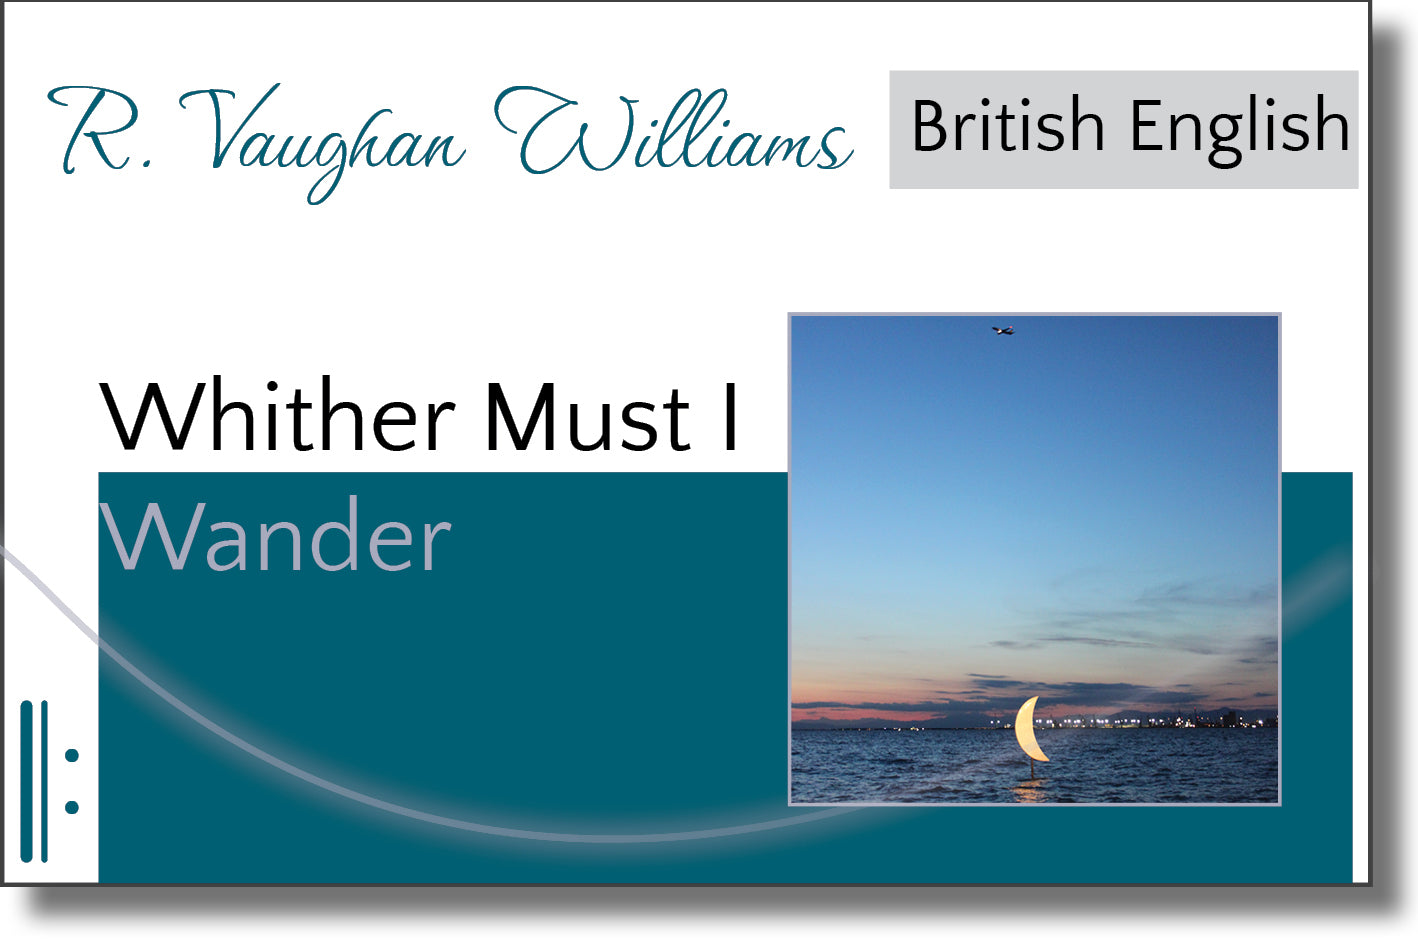 Vaughan Williams - Whither Must I Wander